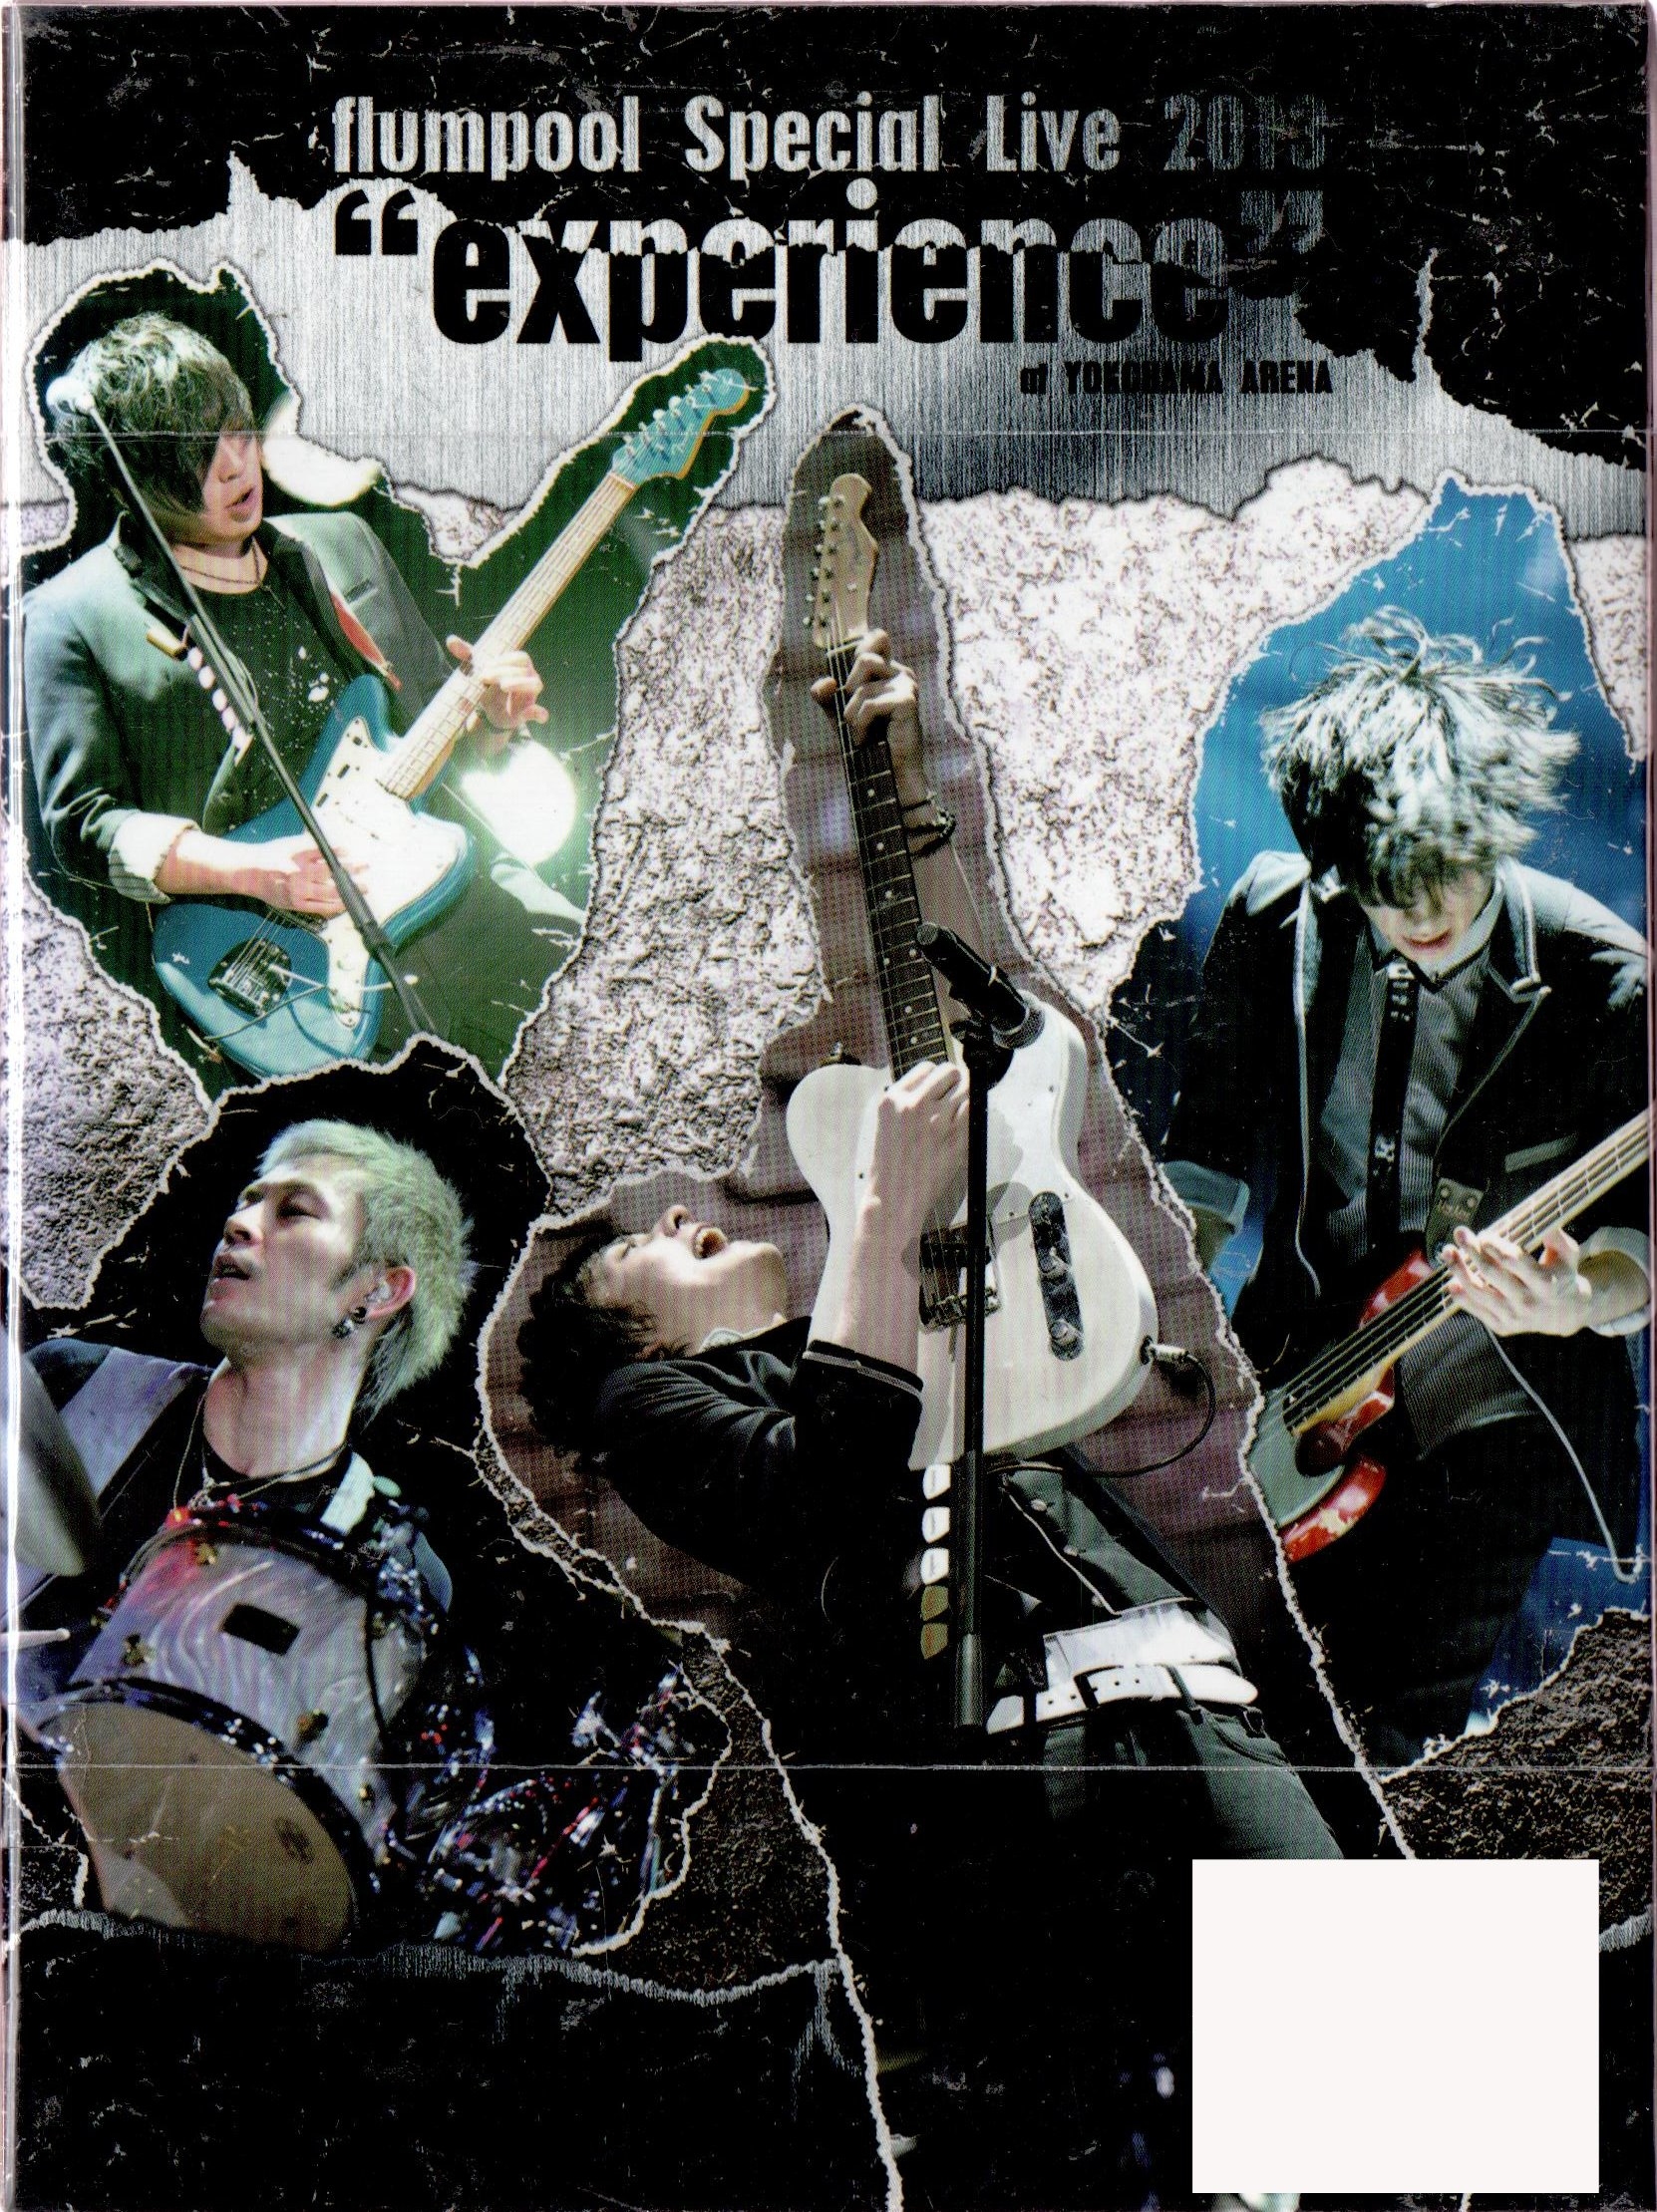 FLUMPOOL/Special Live 2013 “experience” | 03